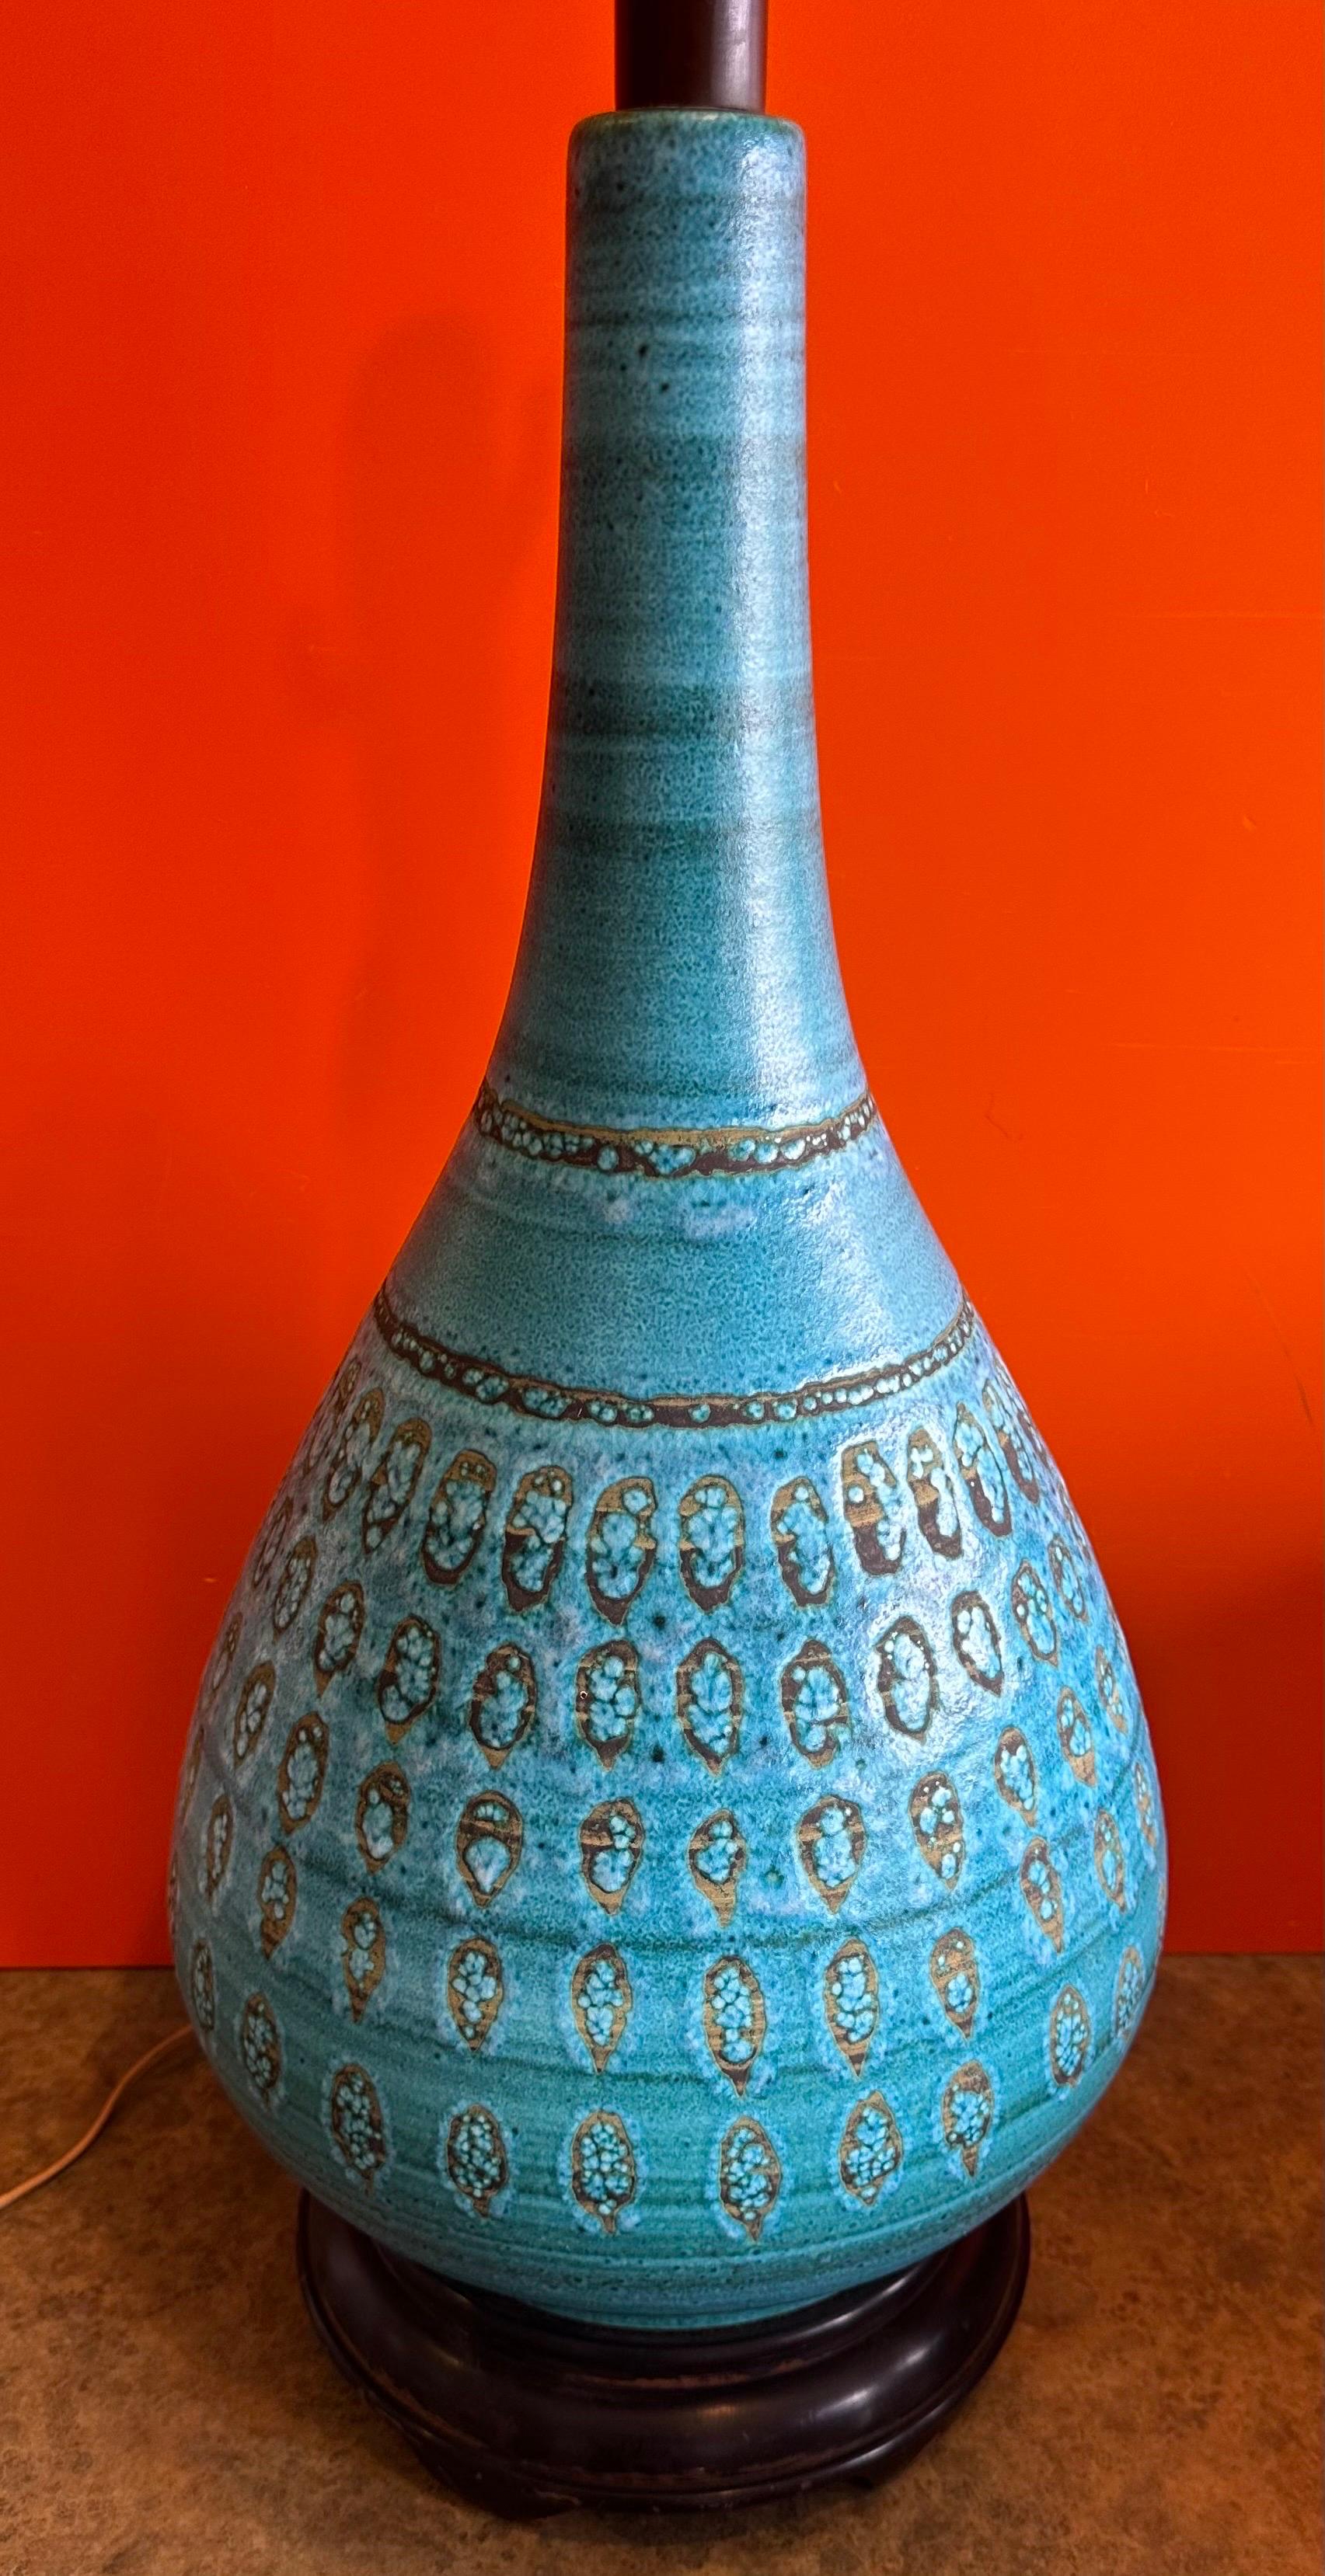 Monumental Turquoise Glazed Ceramic Lamp by Aldo Londi for Bitossi In Good Condition For Sale In San Diego, CA